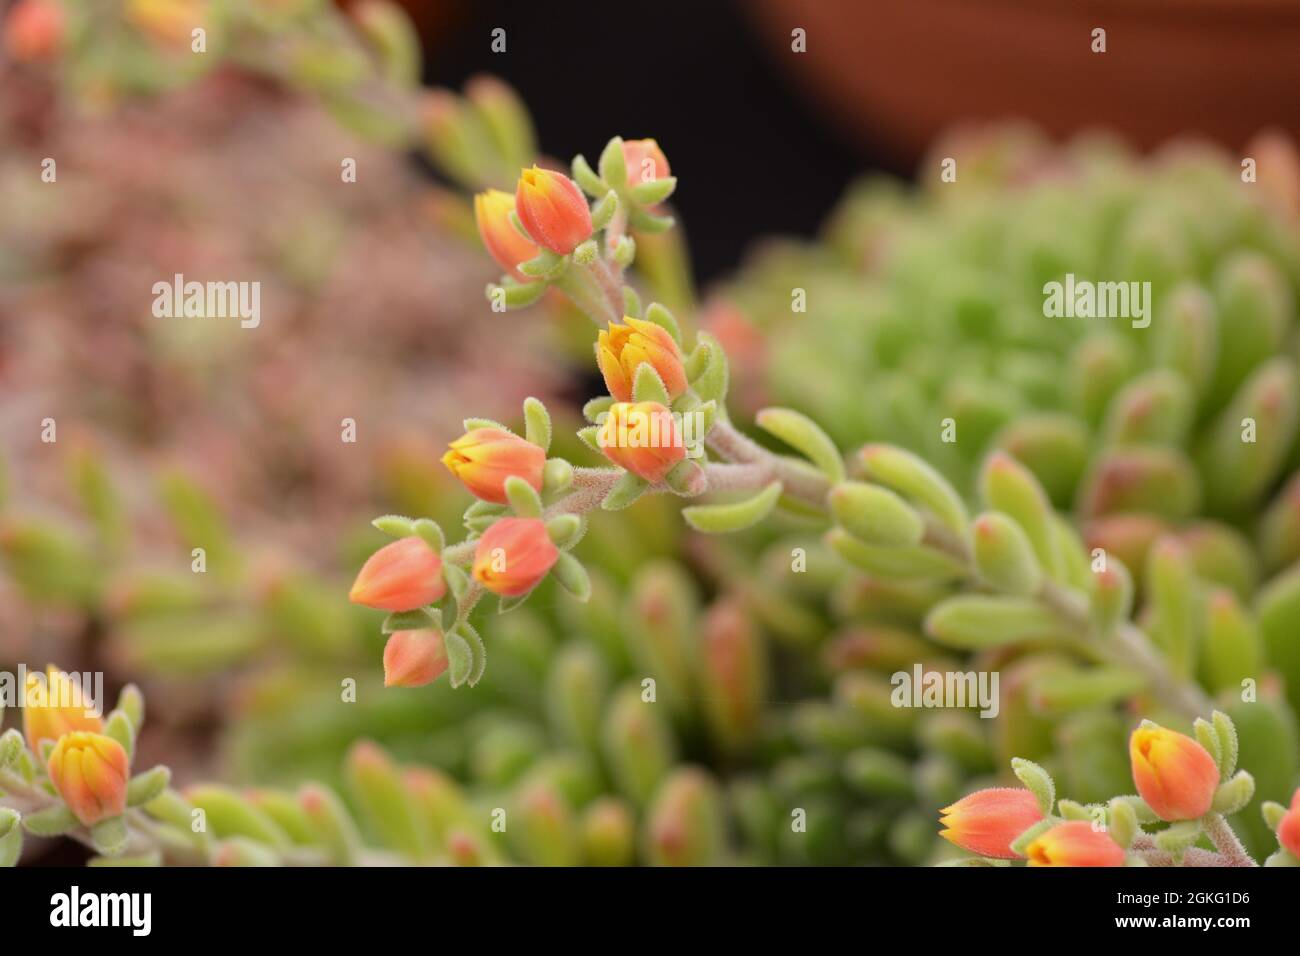 Closeup of blooming succulent flowers with rich red and orange colour. Stock Photo